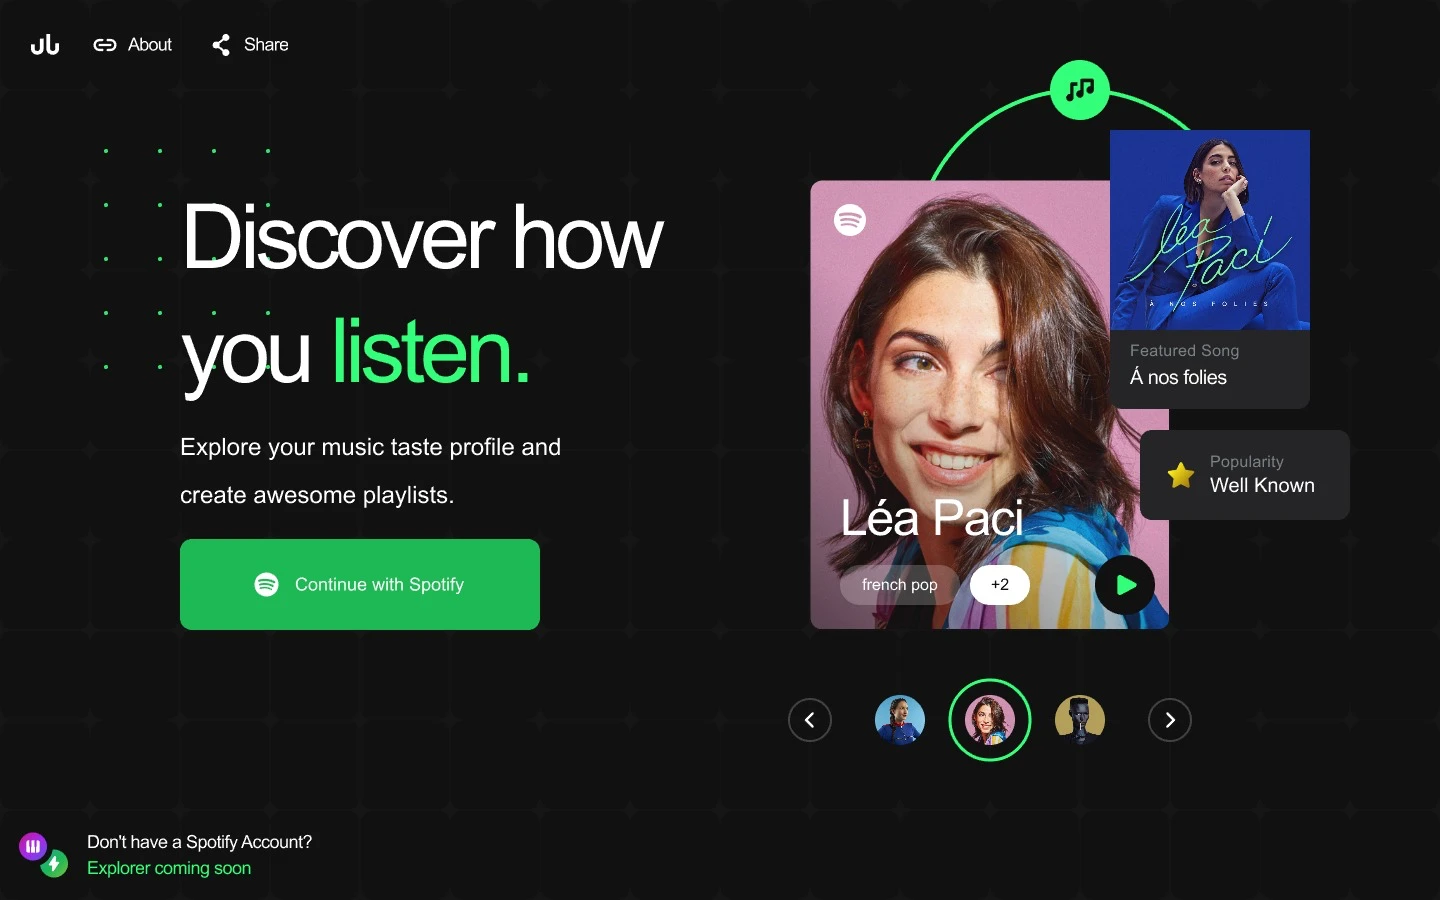 Cruuunchify for InVision Studio - Cruuunchify is a new way to discover how you listen to music, built on Spotify's public API for Spotify users. The design for this project was made entirely in InVision Studio. Feel free to download, remix and re-use.